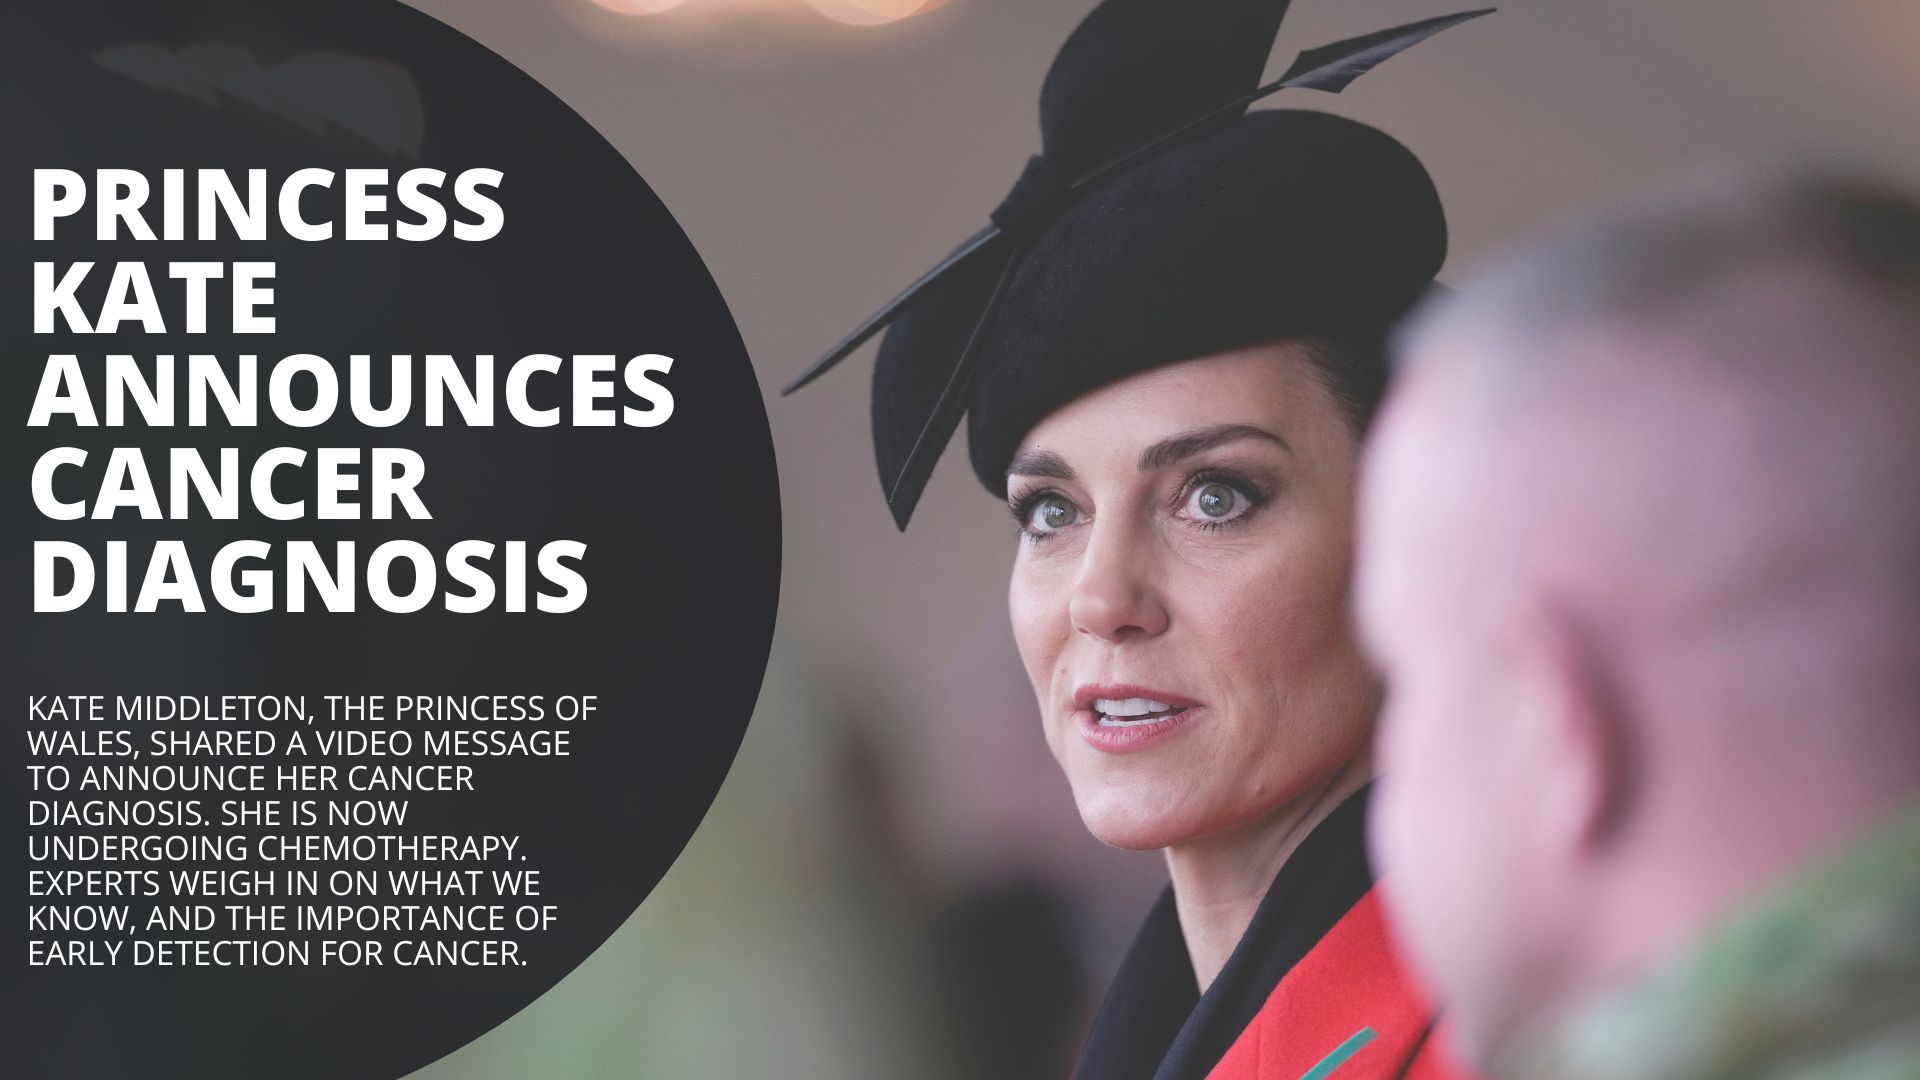 Kate Middleton, the Princess of Wales, announced she has cancer and is undergoing chemotherapy. Experts weigh in and share the importance of early detection.